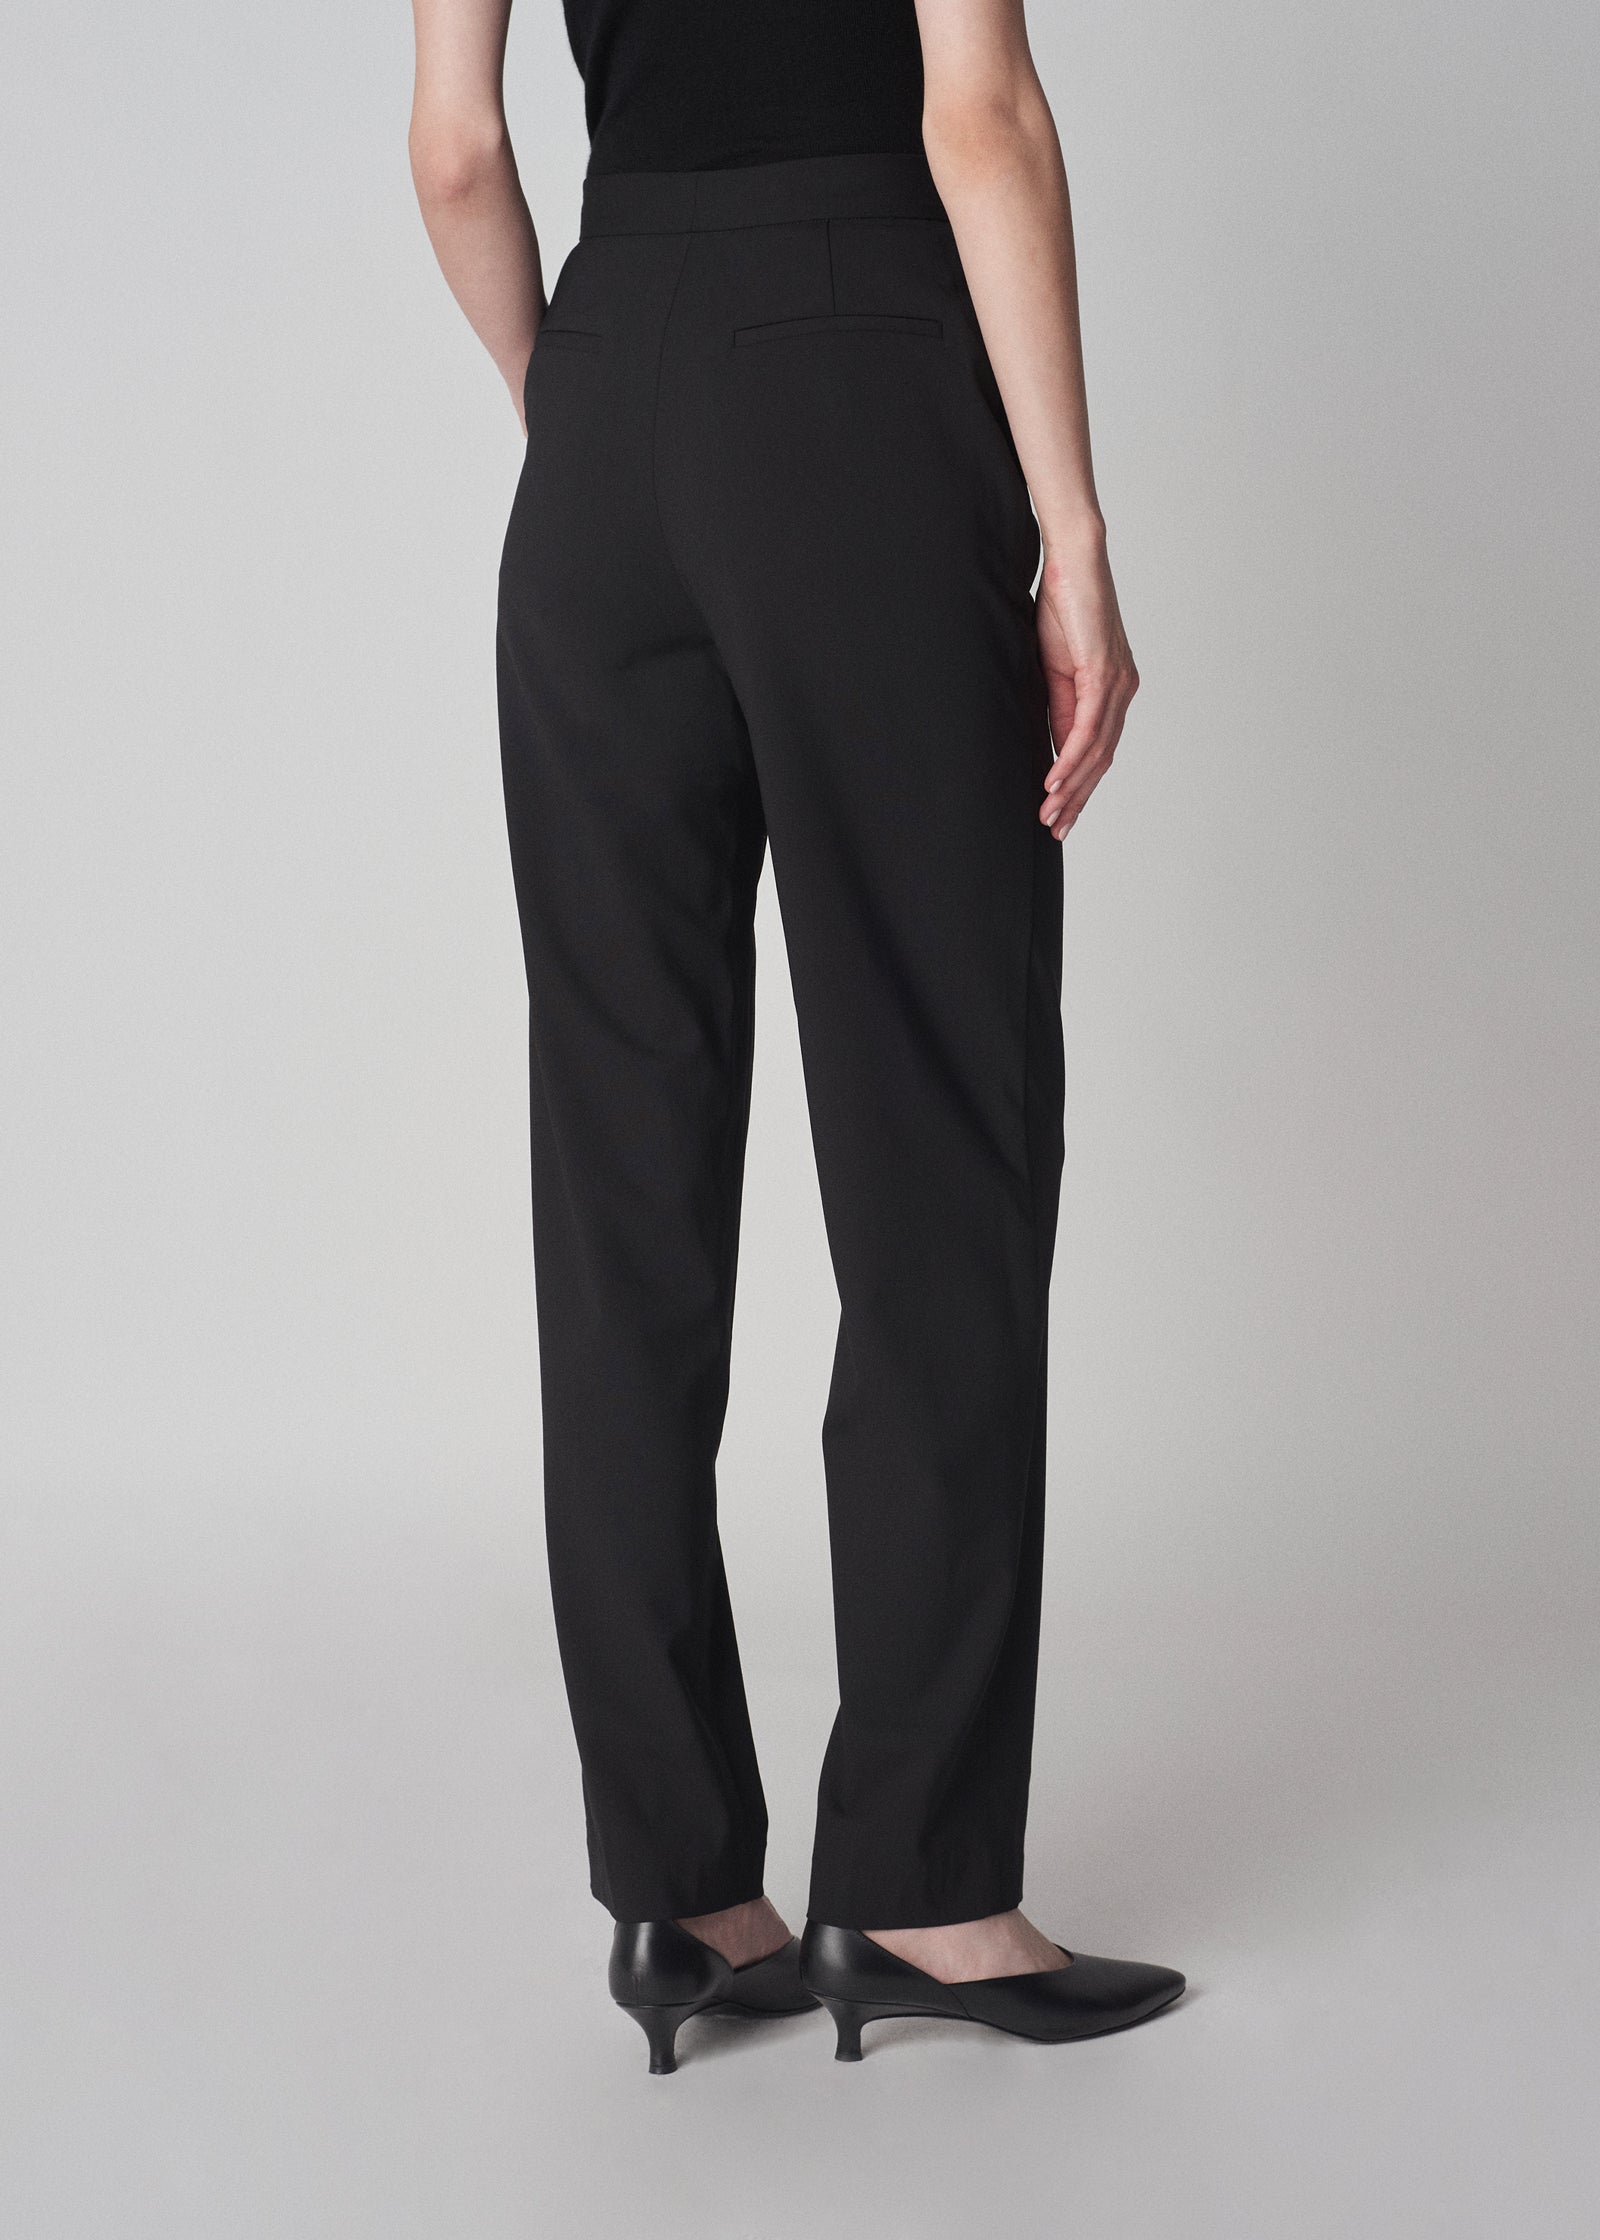 Flat Front Cigarette Trouser in Virgin Wool - Black - CO Collections